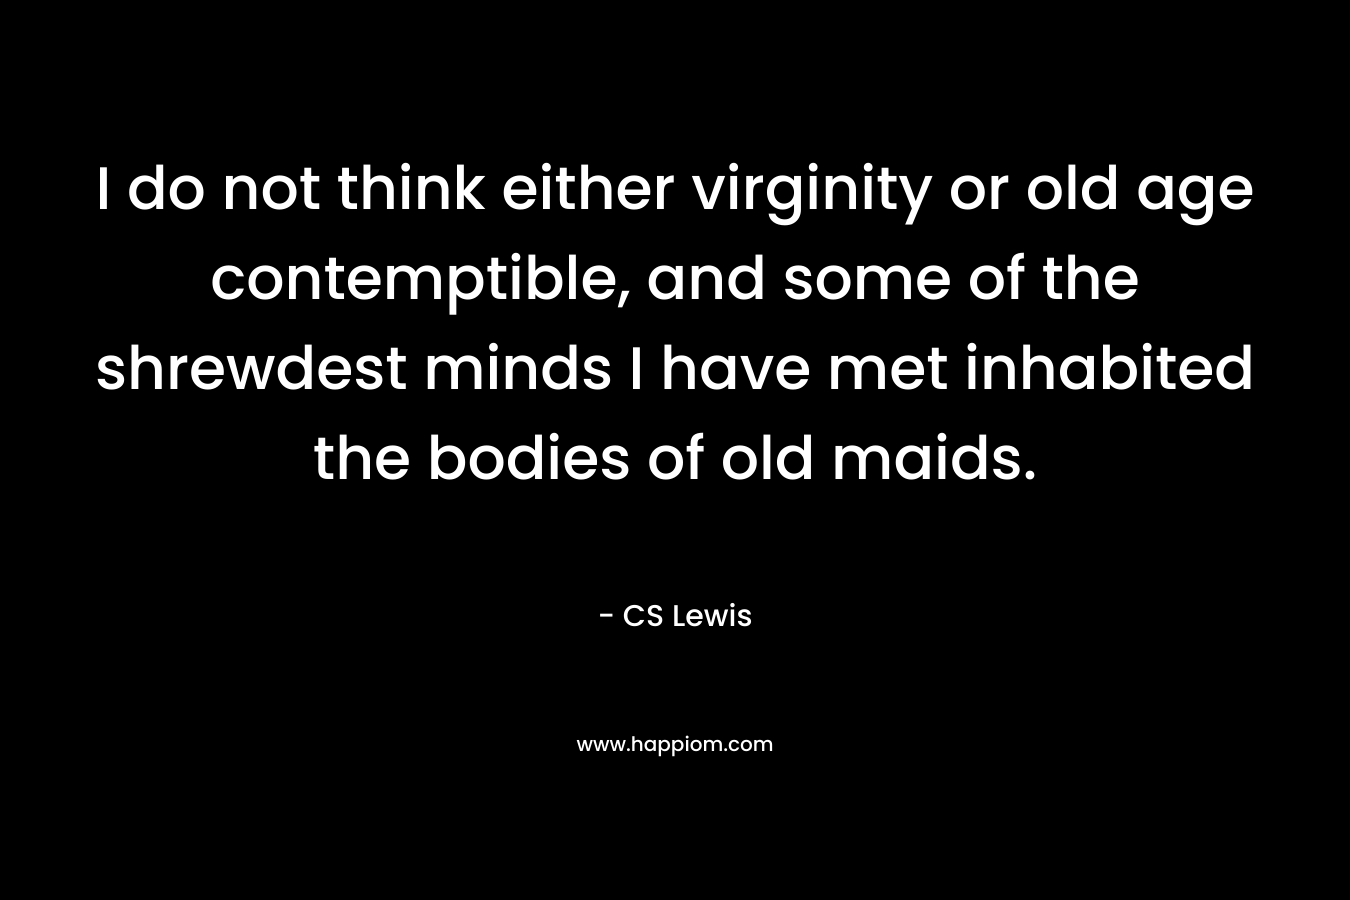 I do not think either virginity or old age contemptible, and some of the shrewdest minds I have met inhabited the bodies of old maids. – CS Lewis